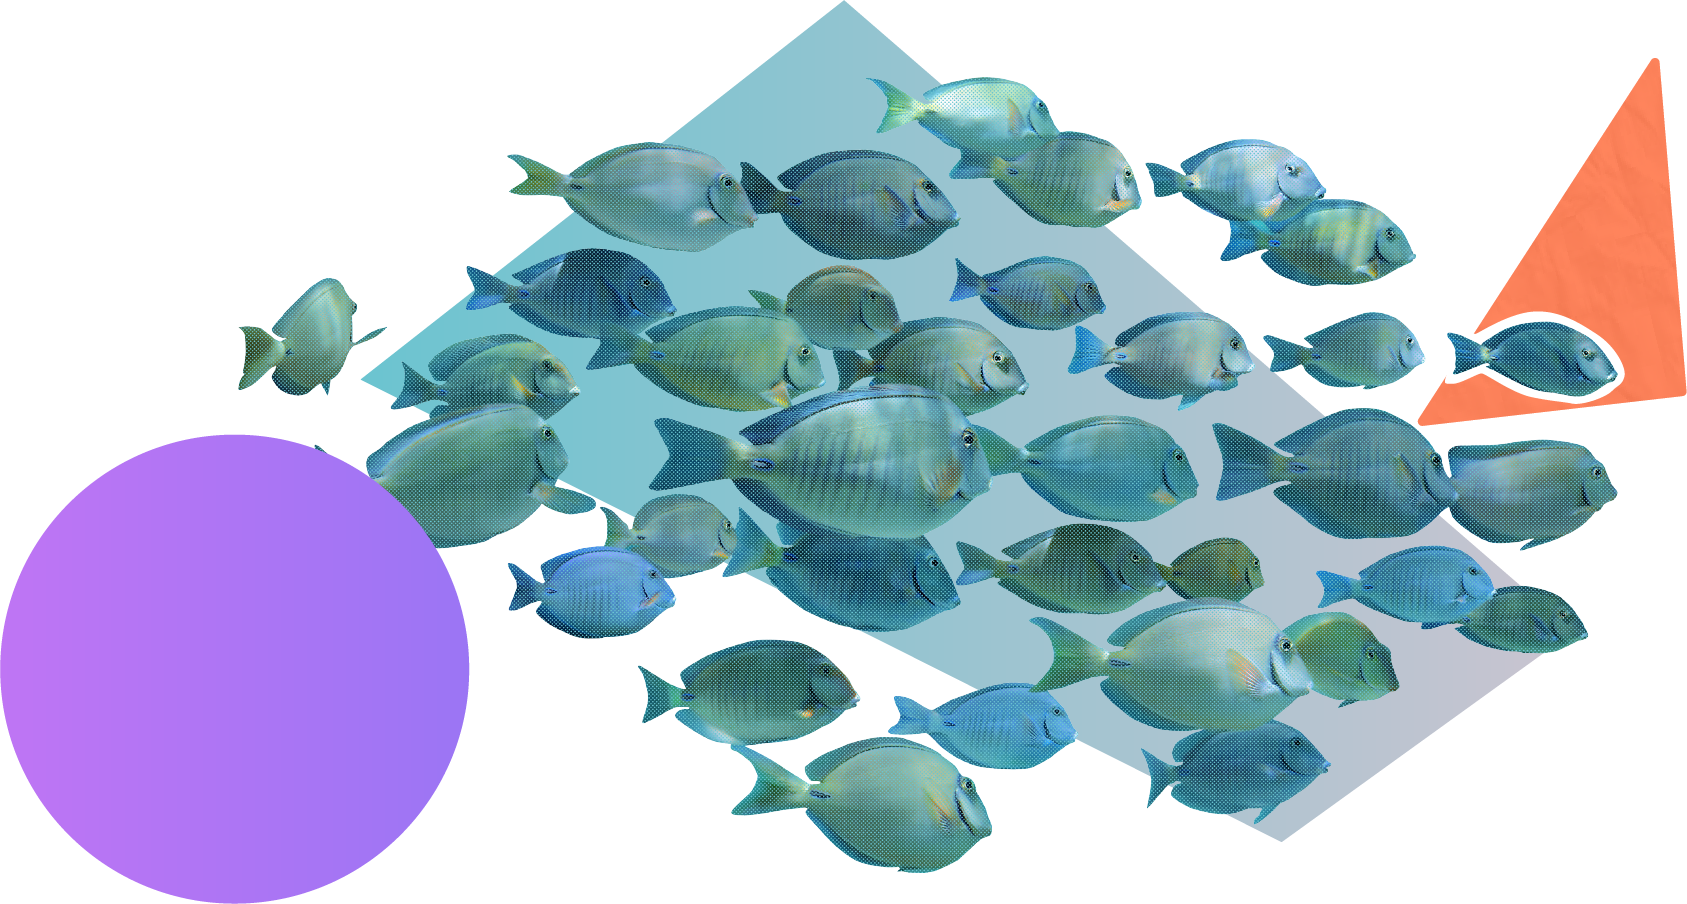 A school of fish surrounded by colourful shapes